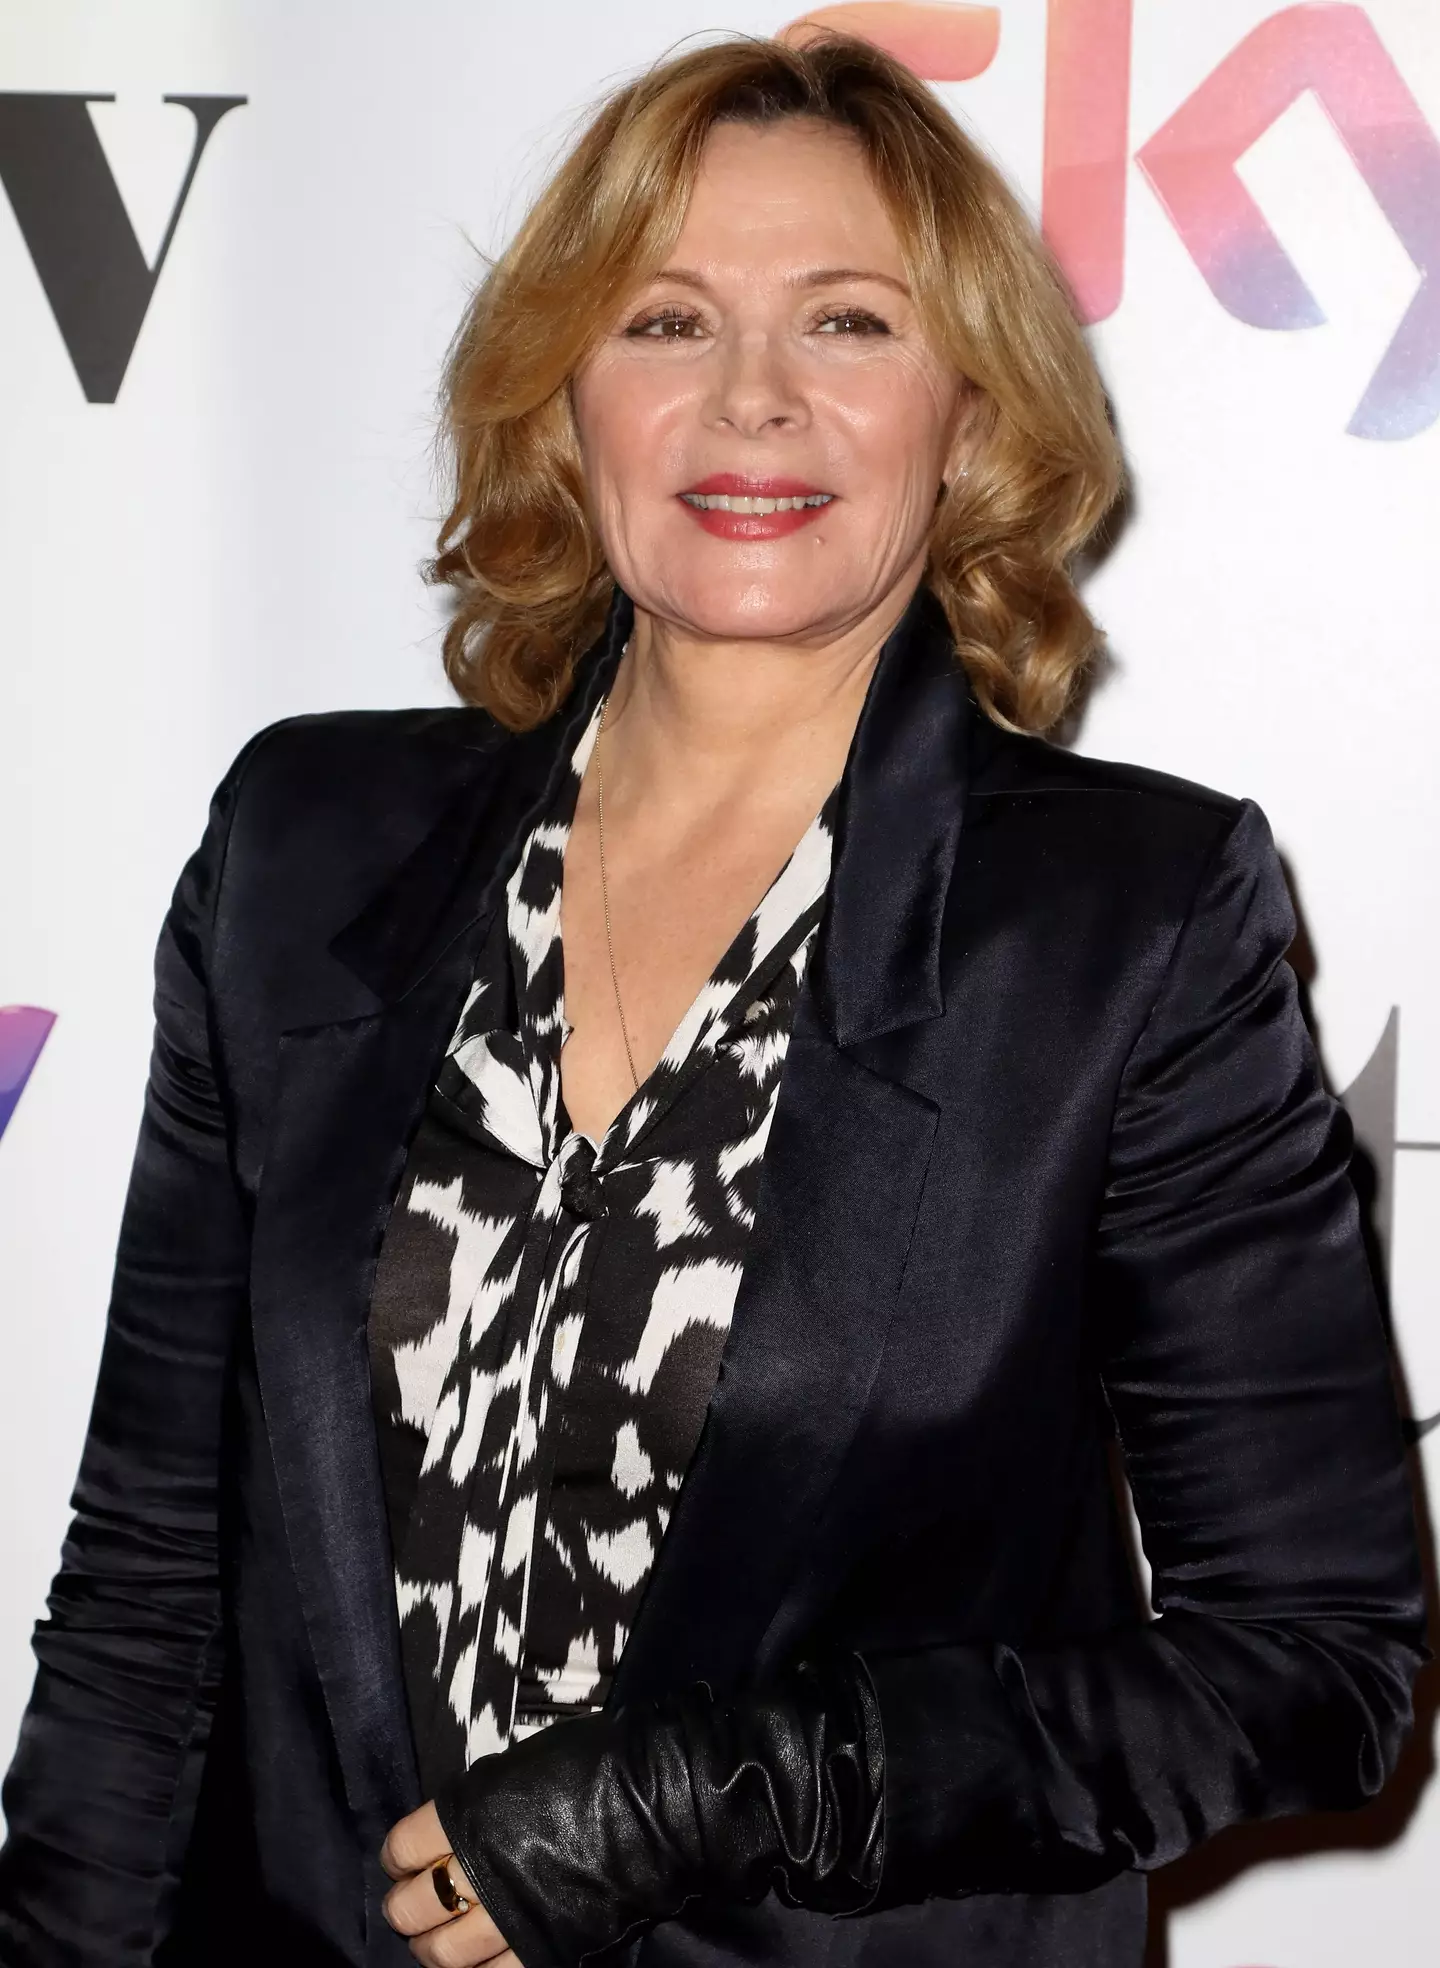 Kim Cattrall gave her speech at the award ceremony.